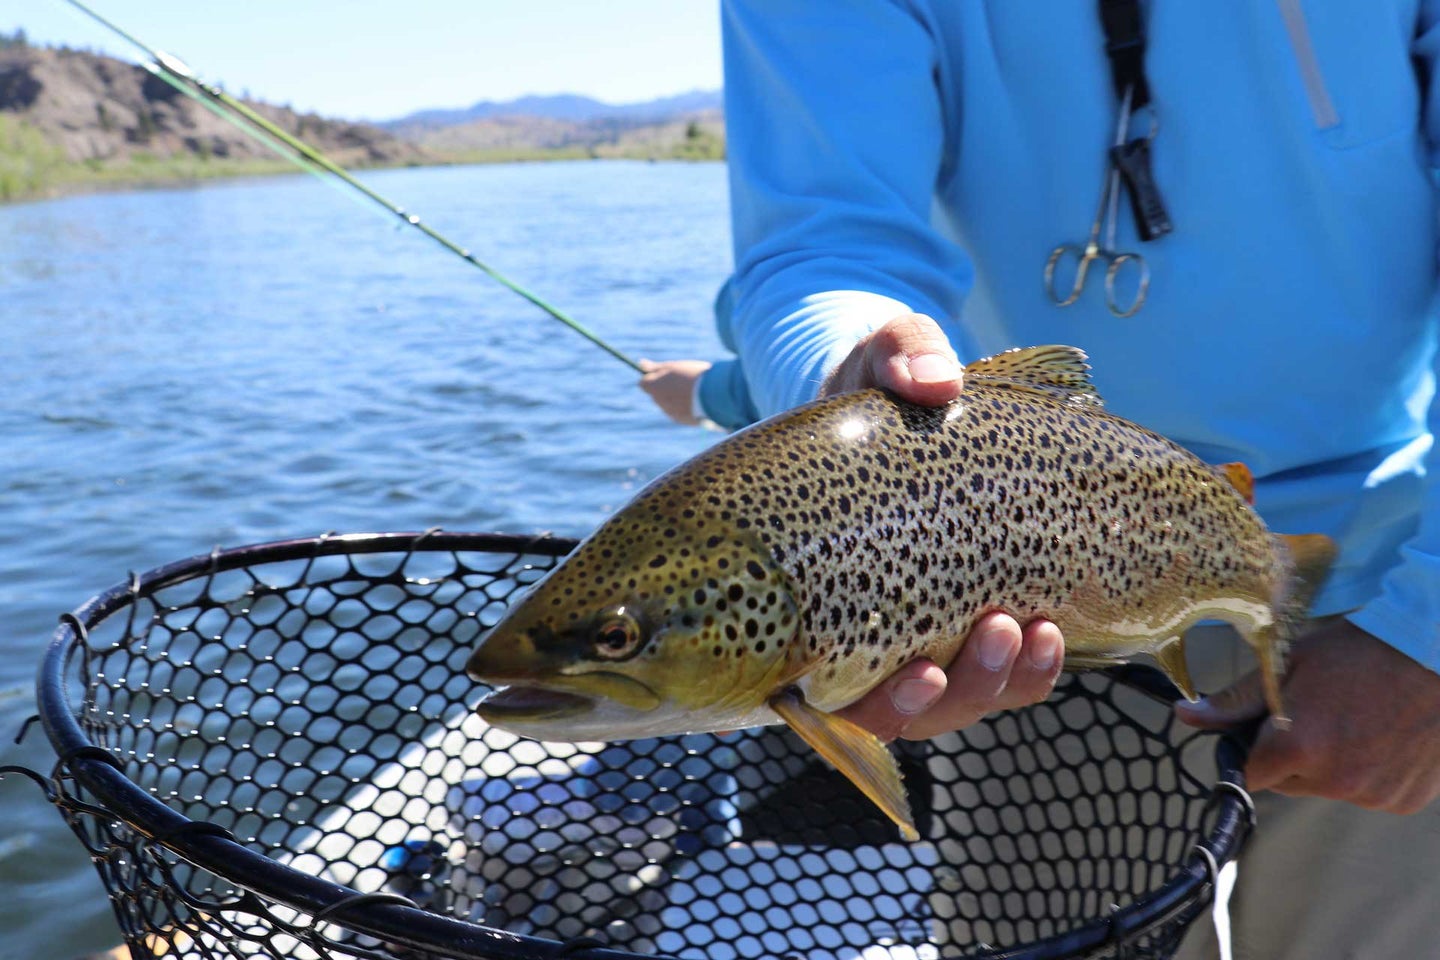 A brown trout being pulled out of a fishing net.